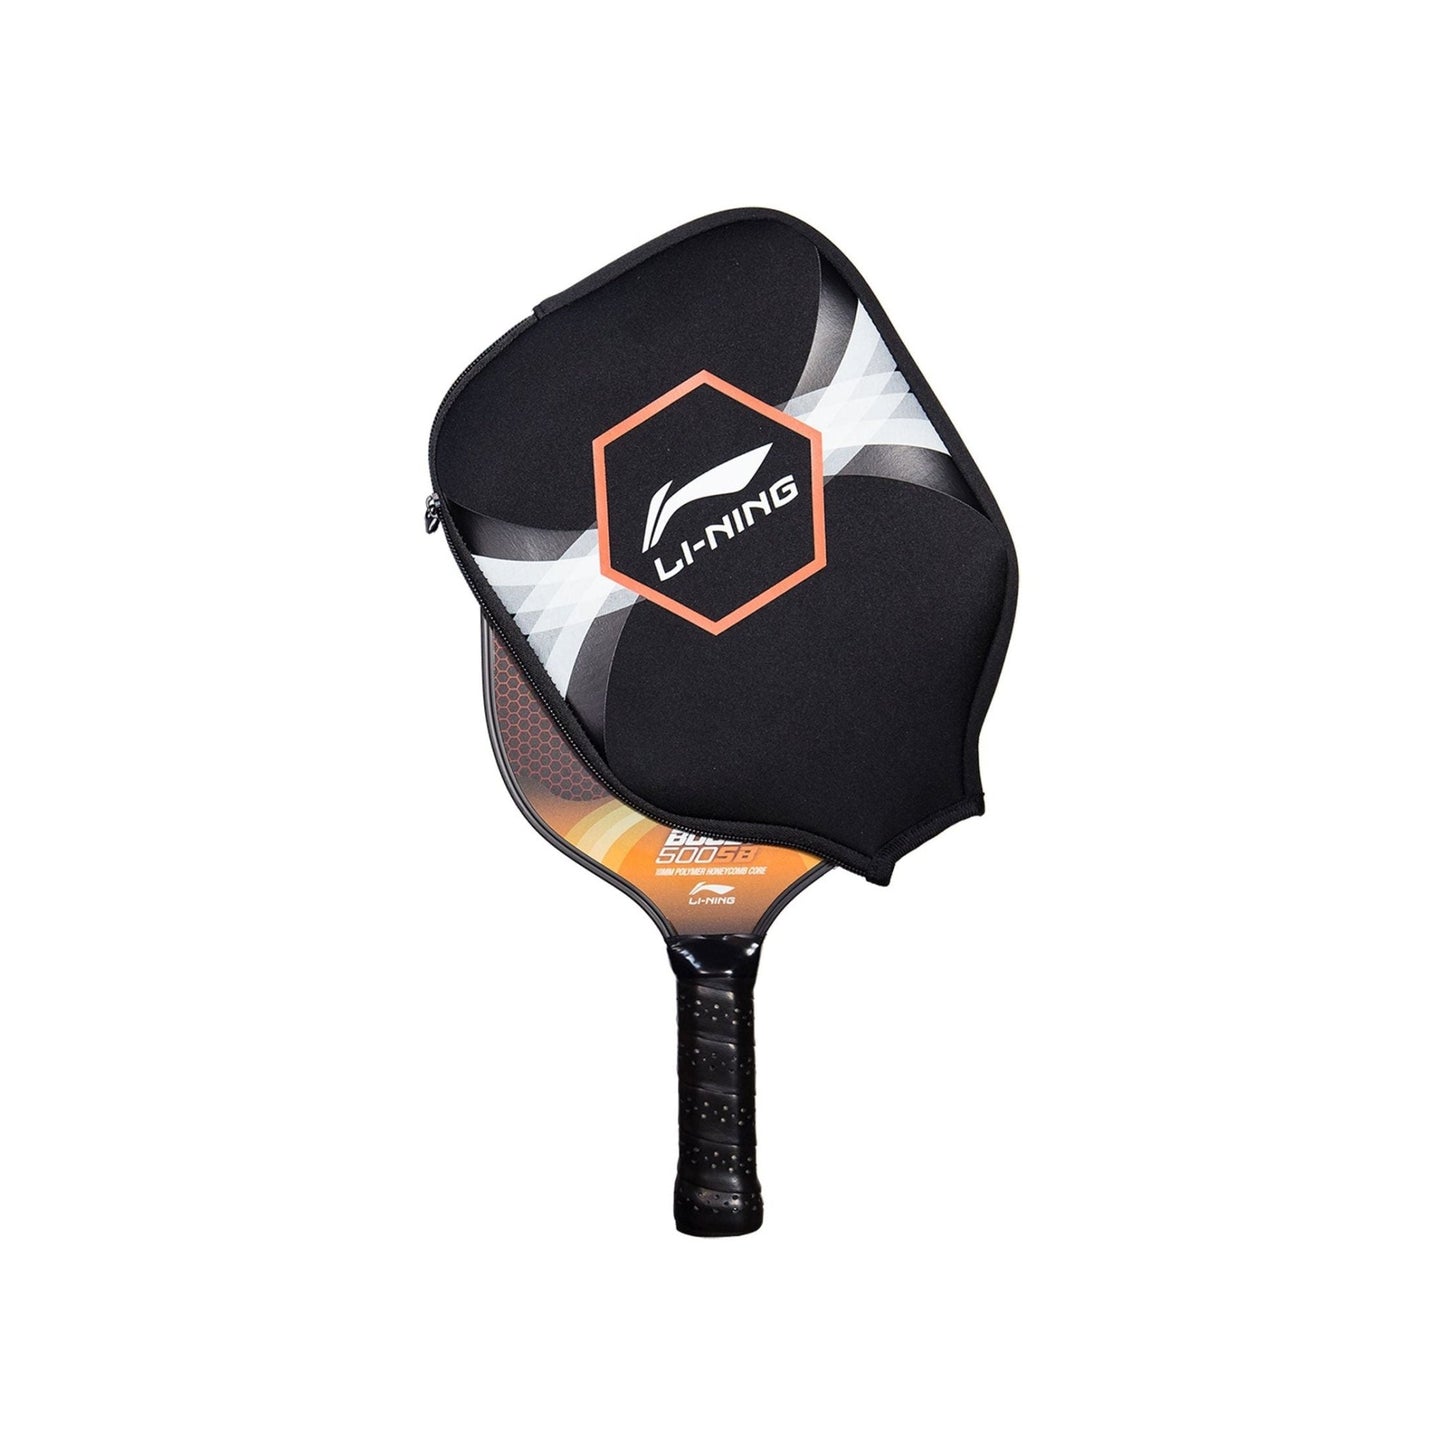 PADDLE COVER - STANDARD - Grip On Golf & Pickleball Zone